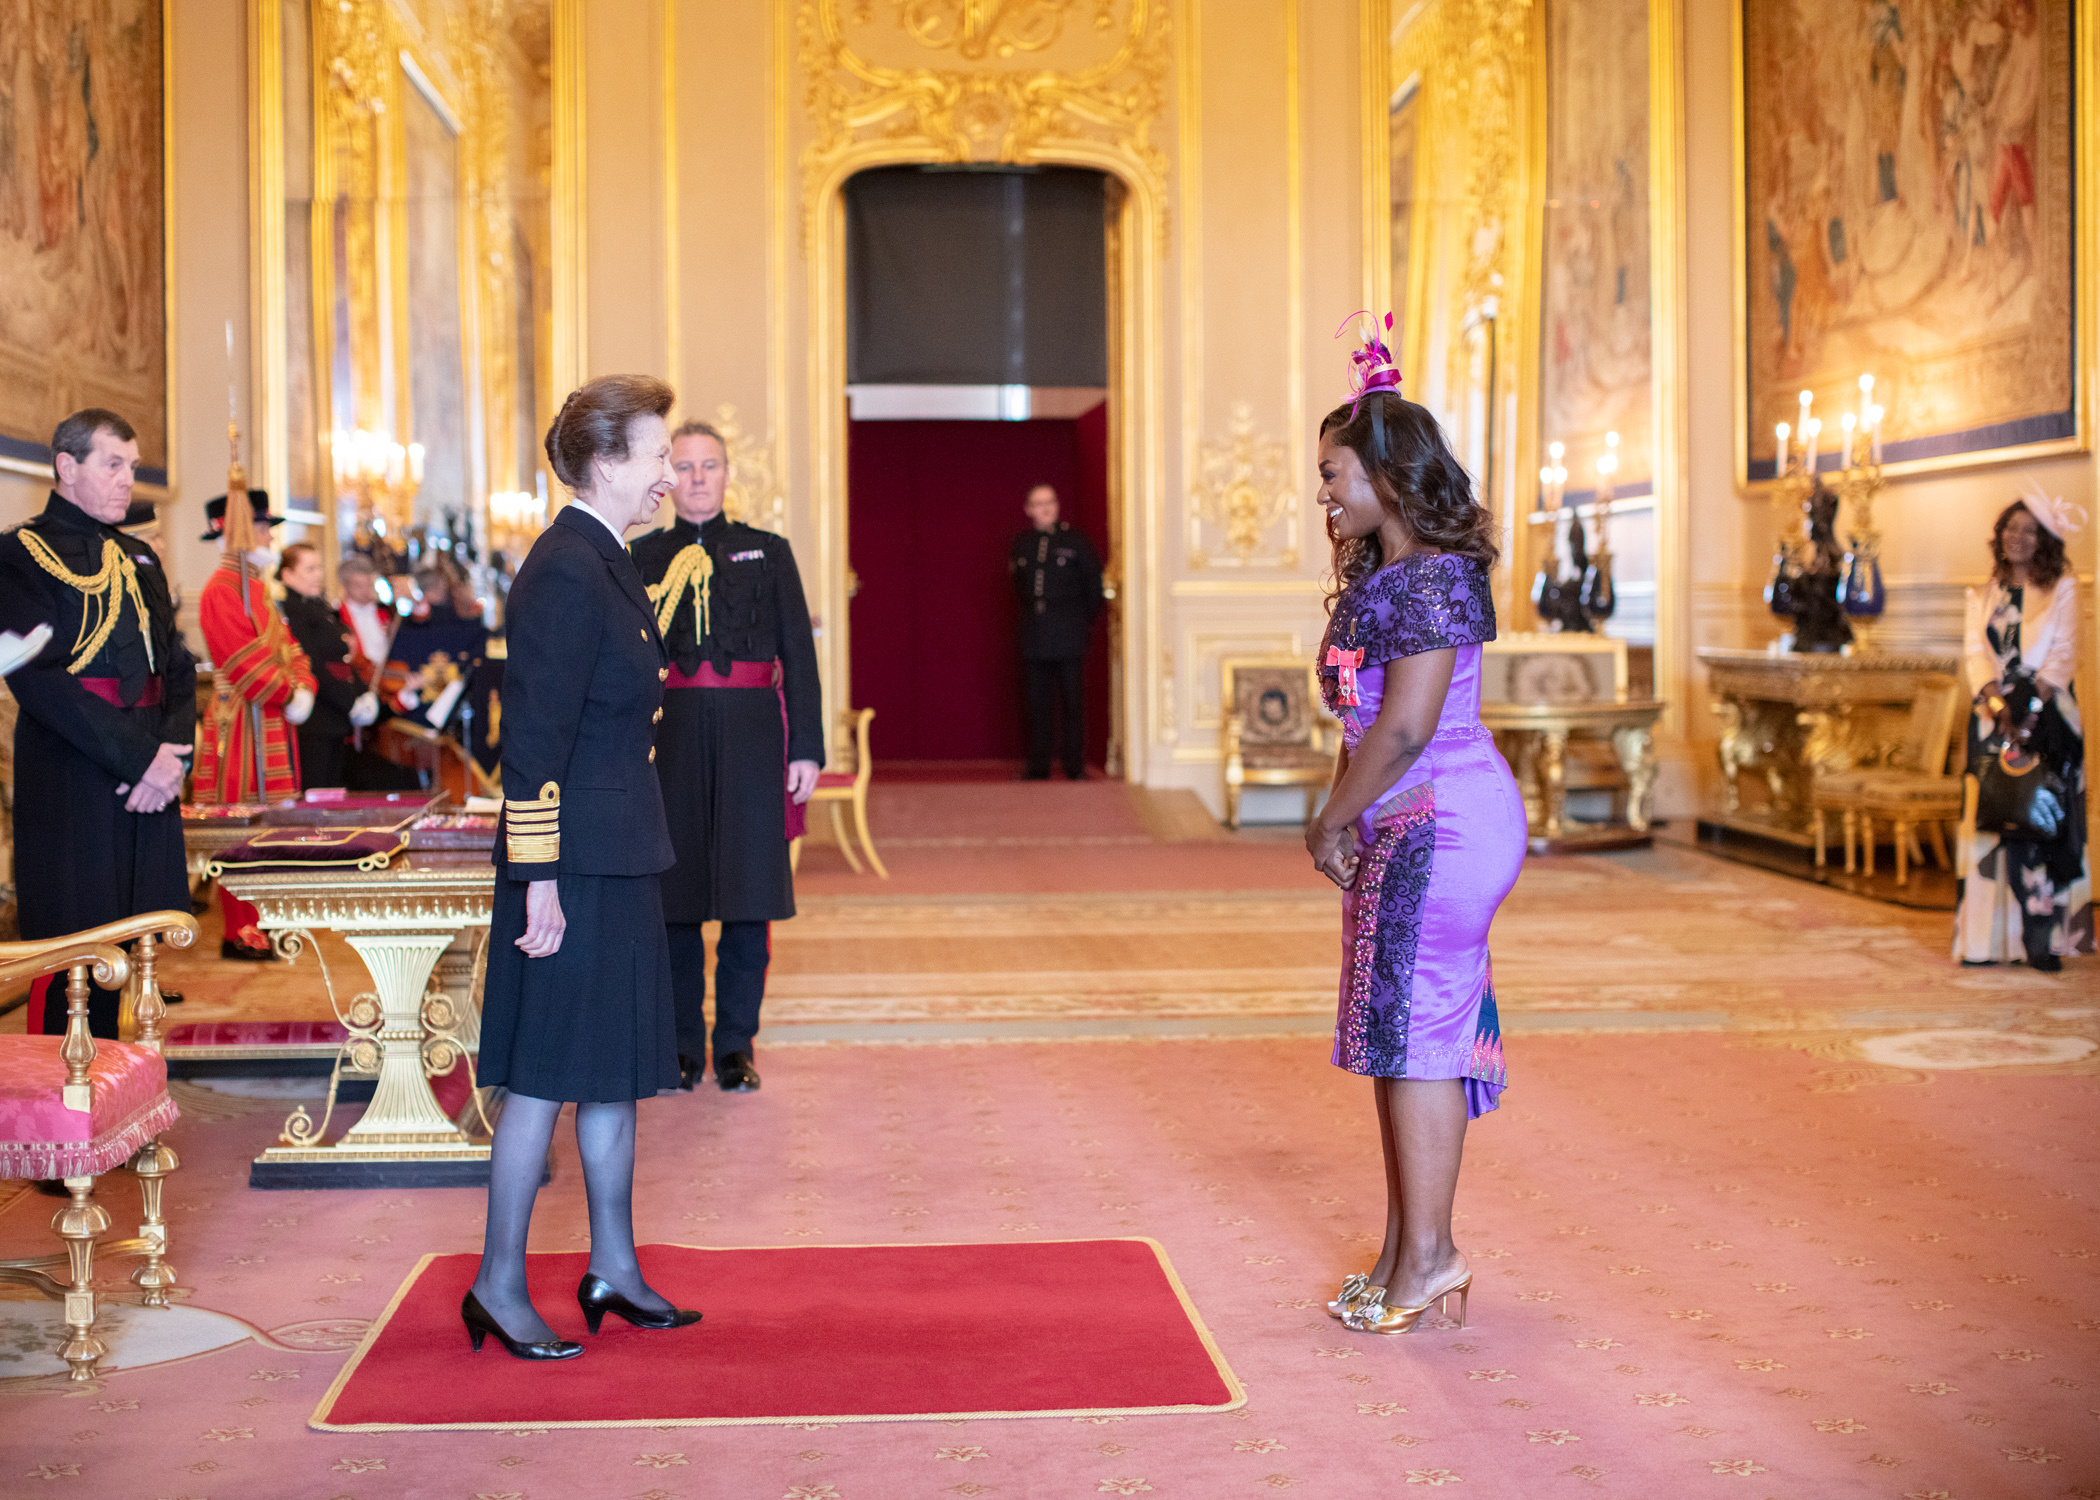 Lorraine Wright receives ‘Most Excellent Order of British Empire Award’ from Queen of England